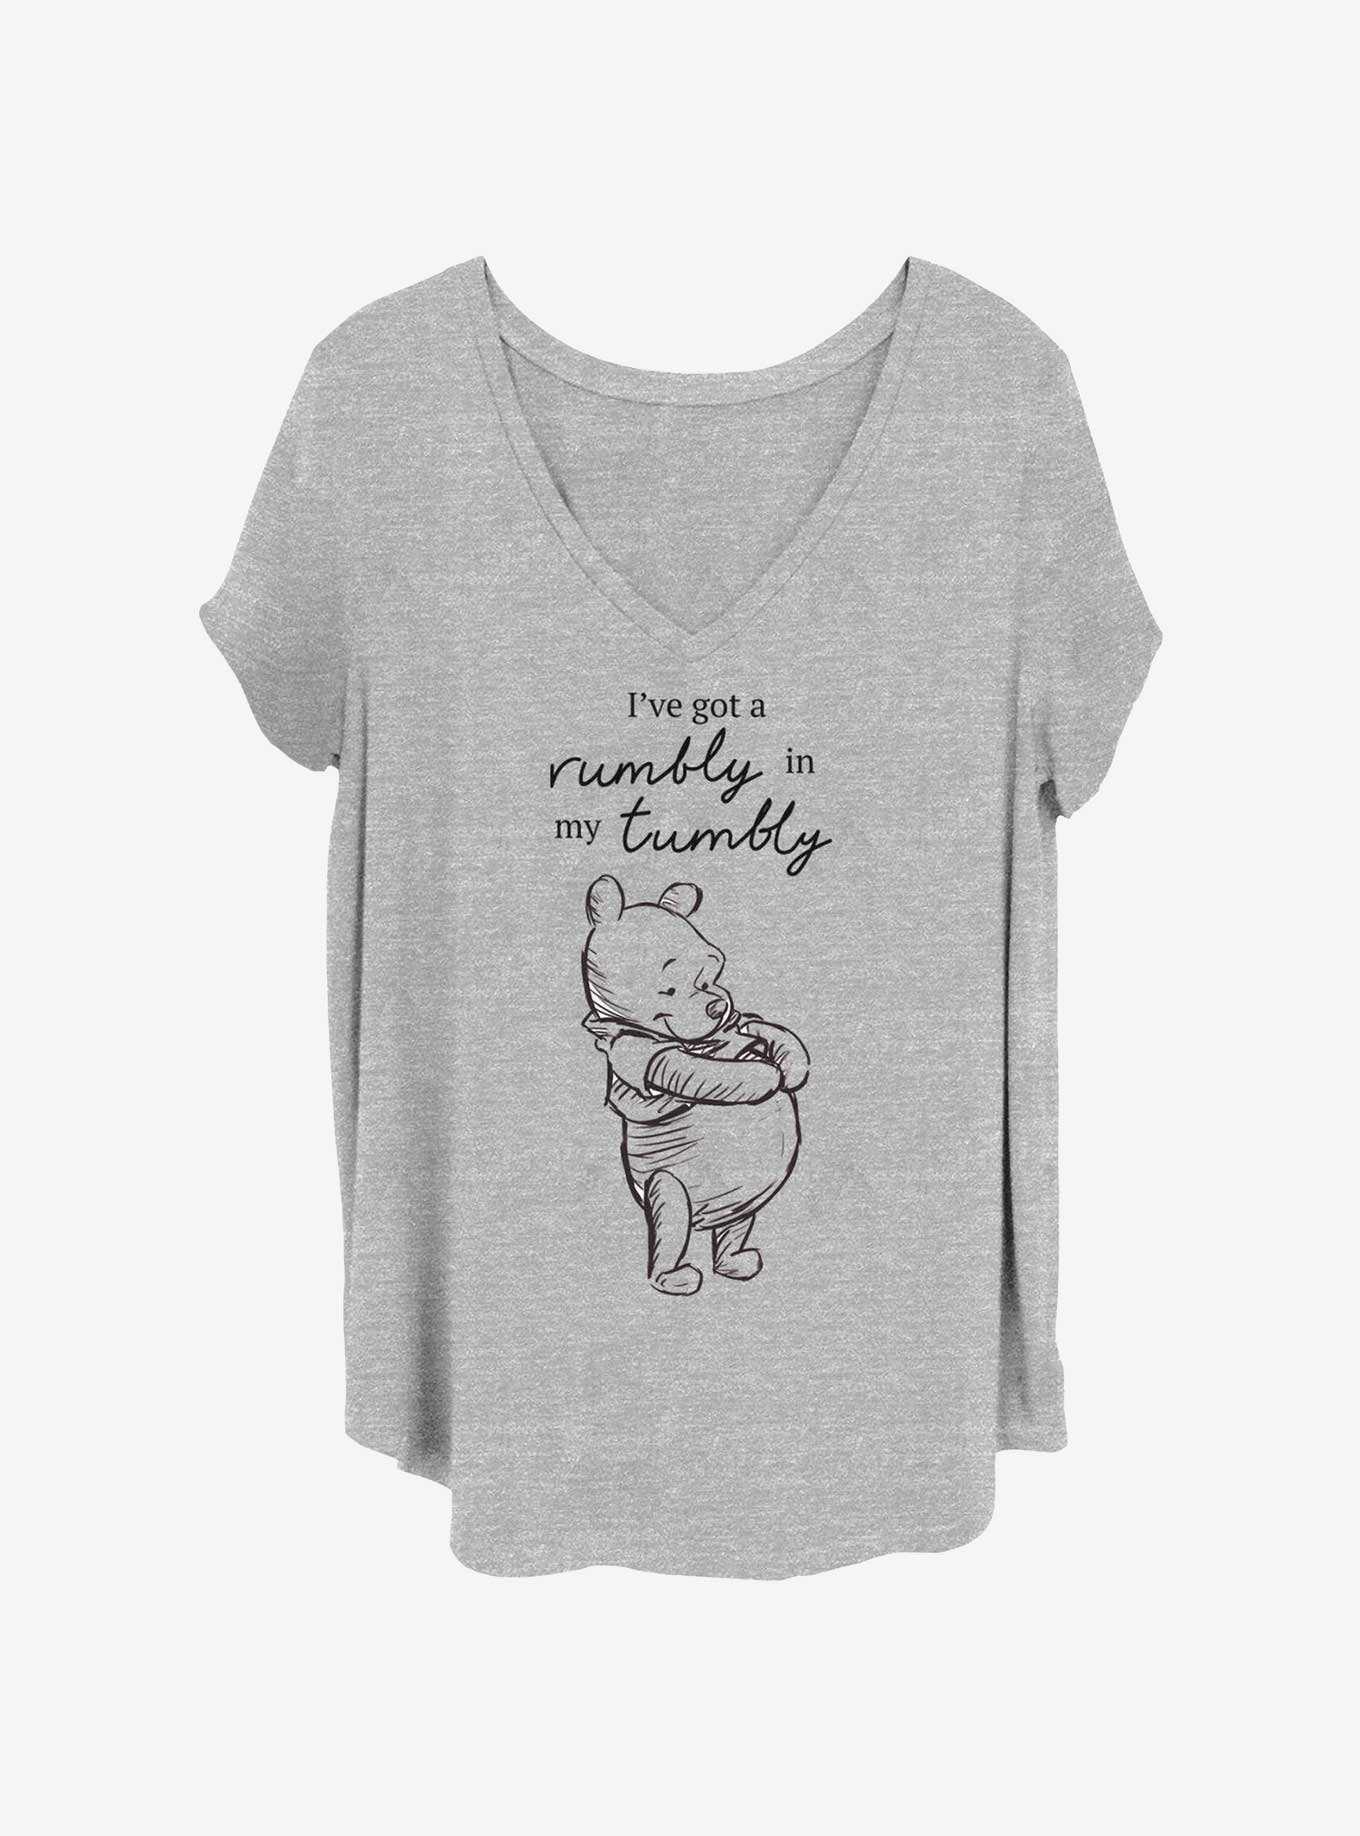 Disney Winnie The Pooh Rumbly In My Tumbly Girls T-Shirt Plus Size, , hi-res